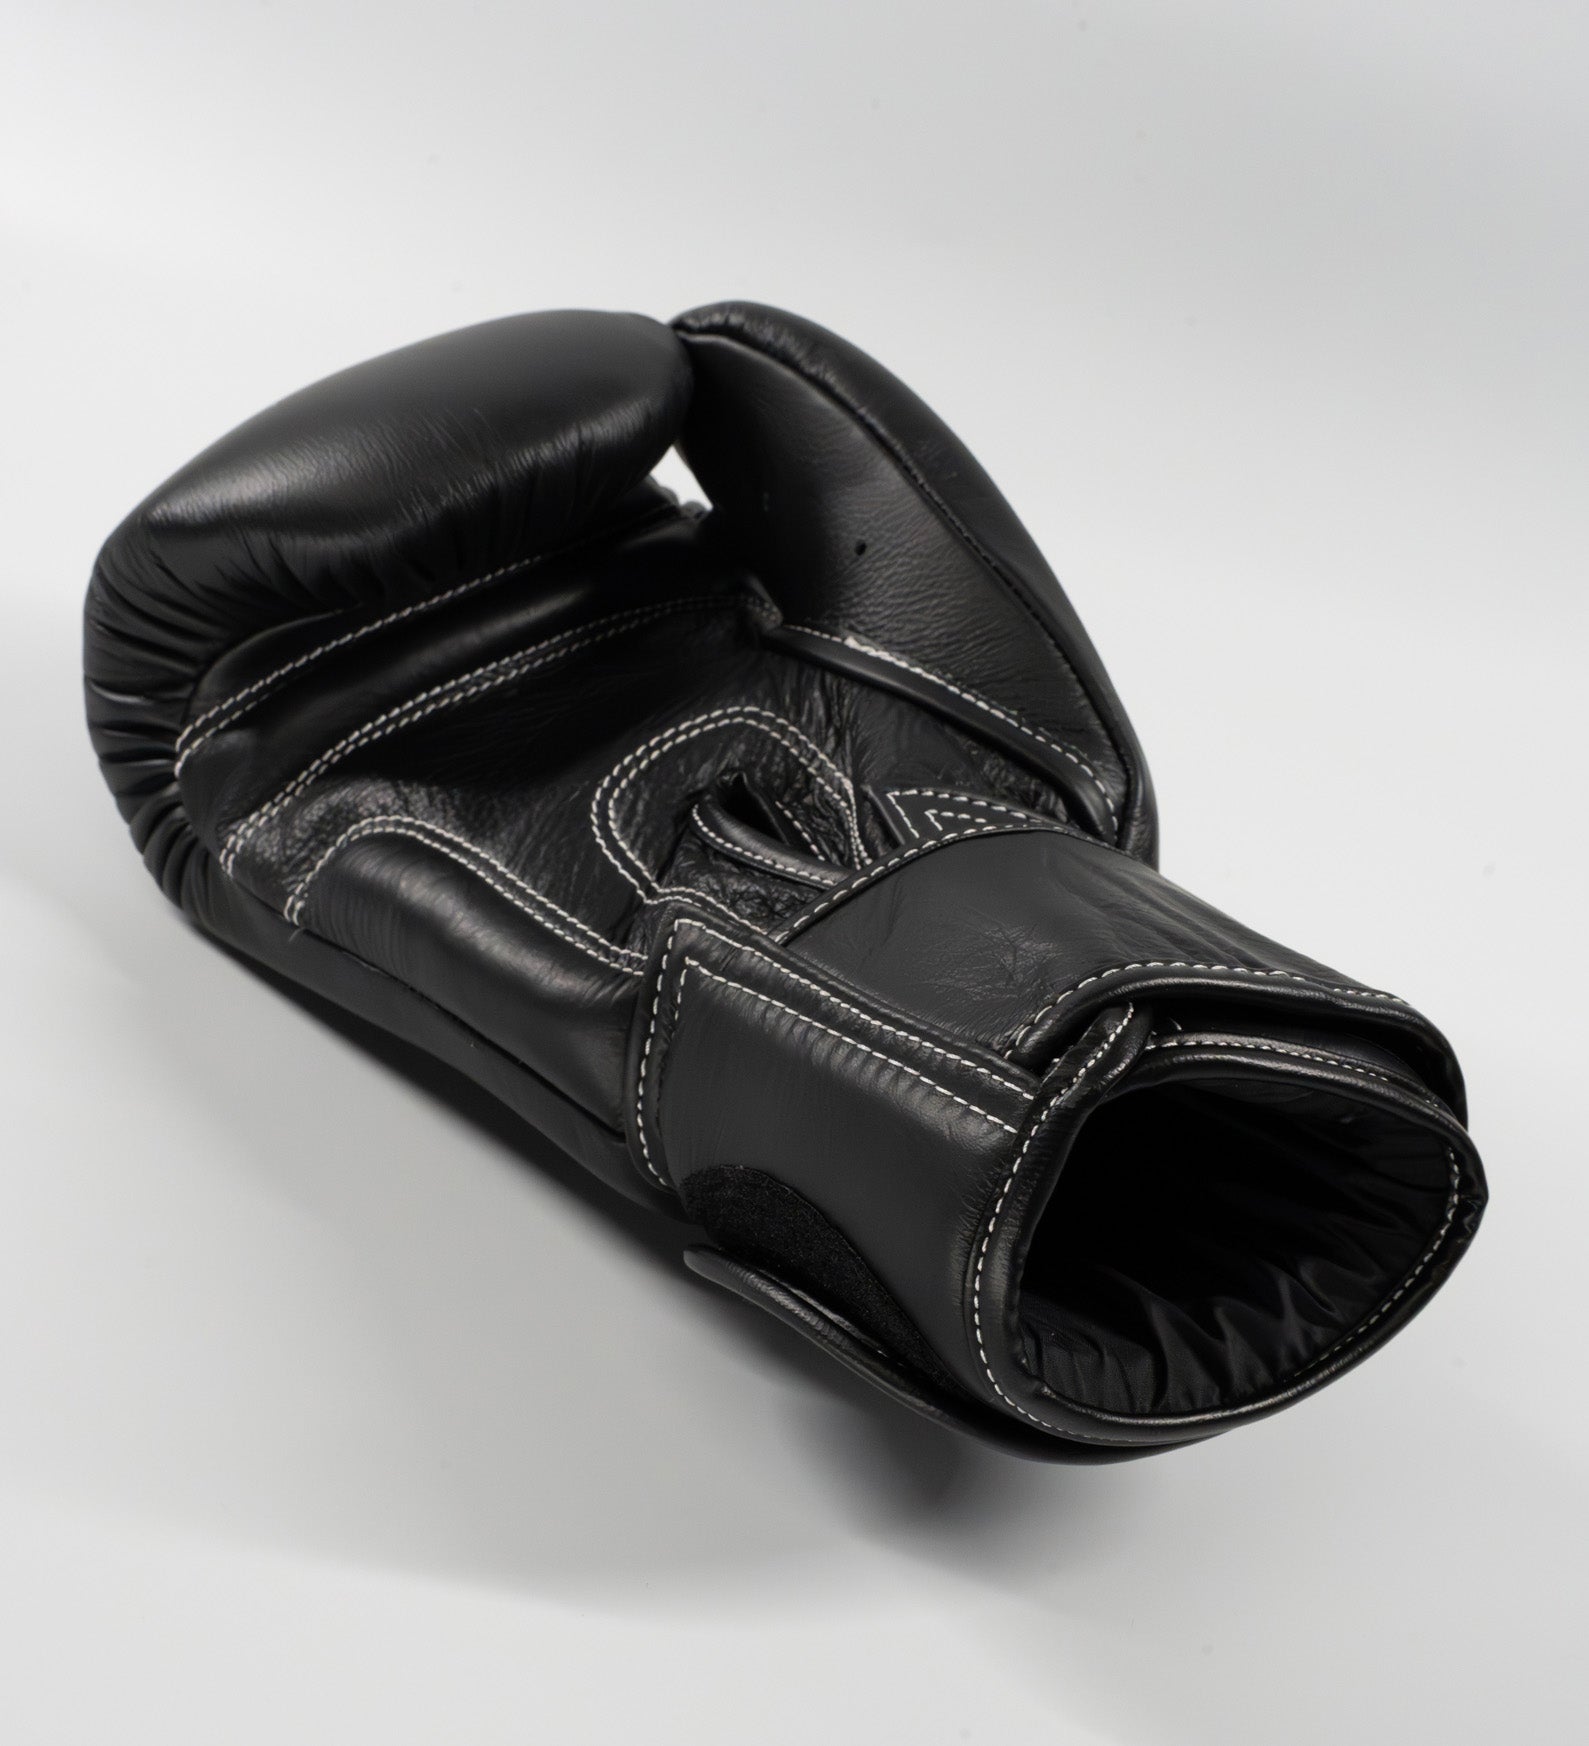 Caged Boxhandschuhe Nero - Schwarz/Weiss - The Fight Company